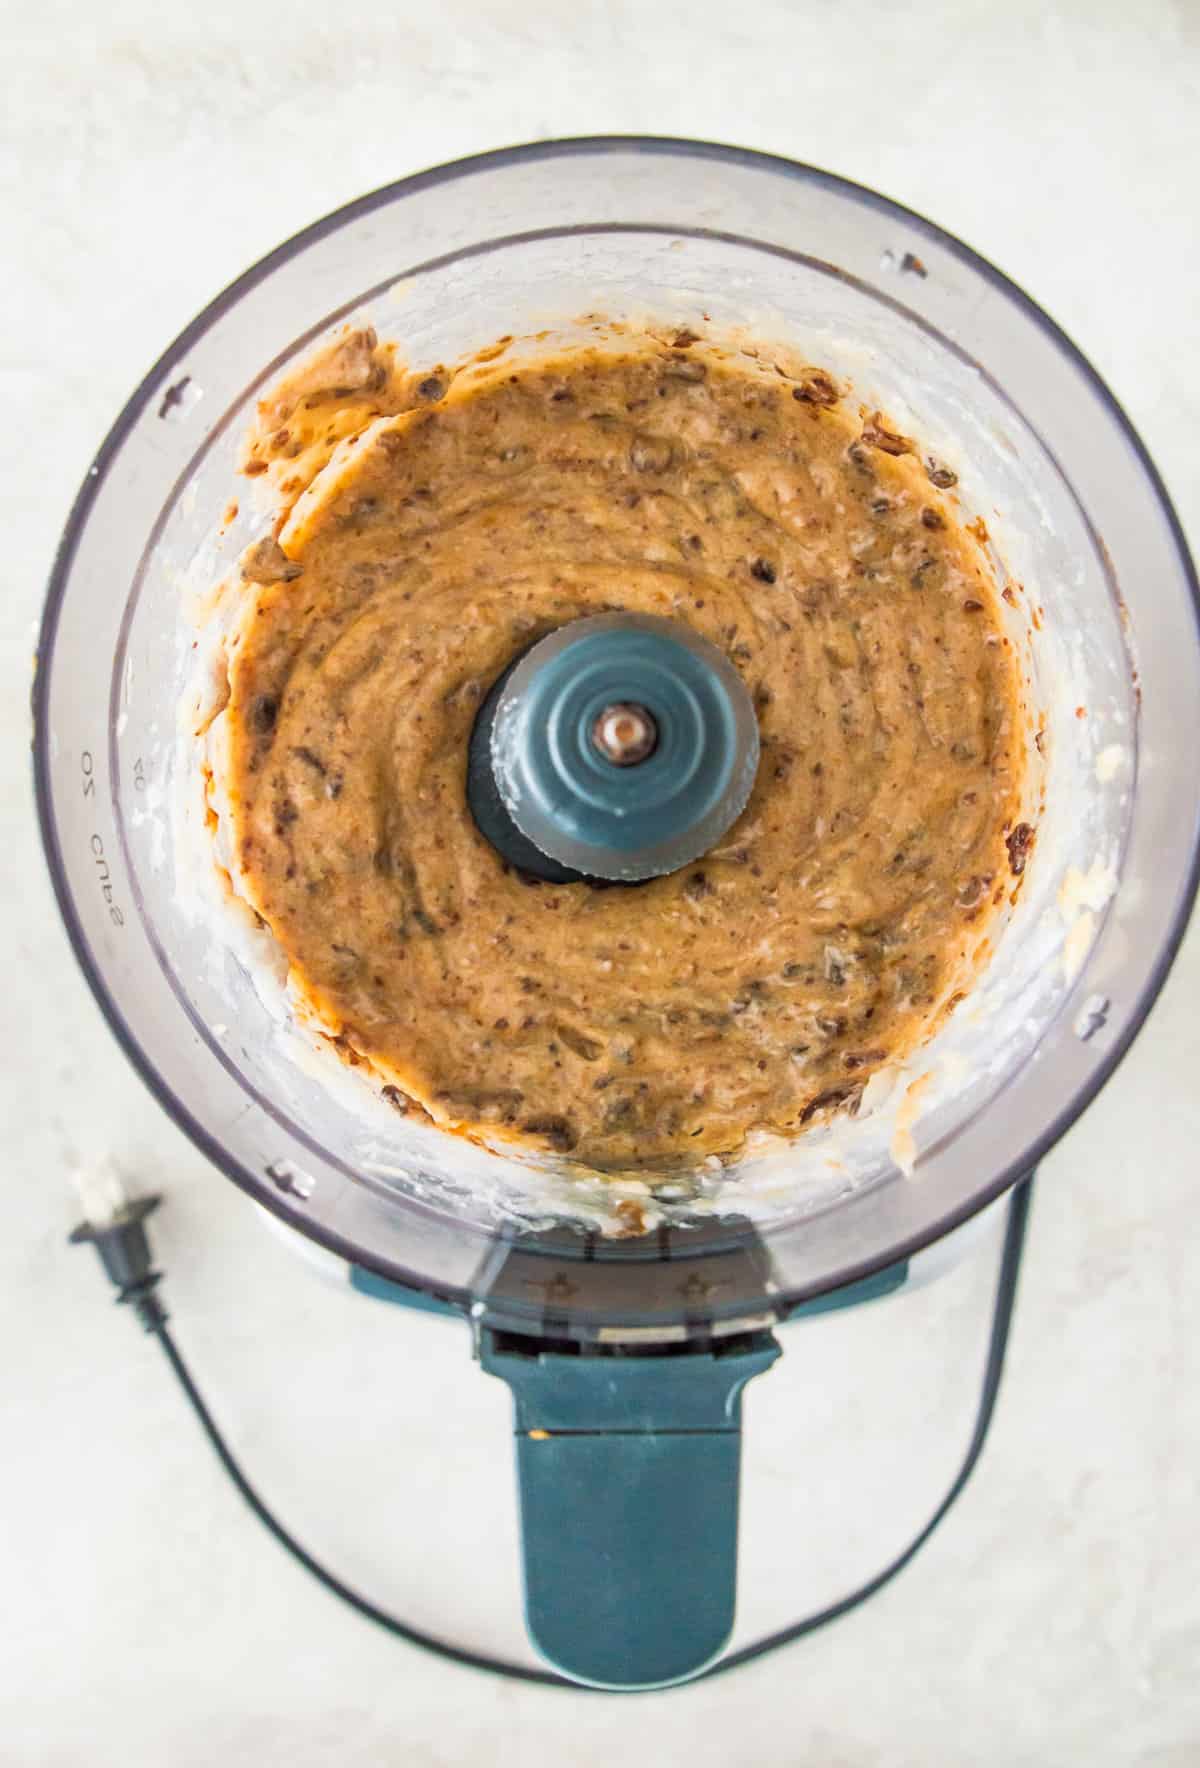 A food processor with blended bananas and dates in it.